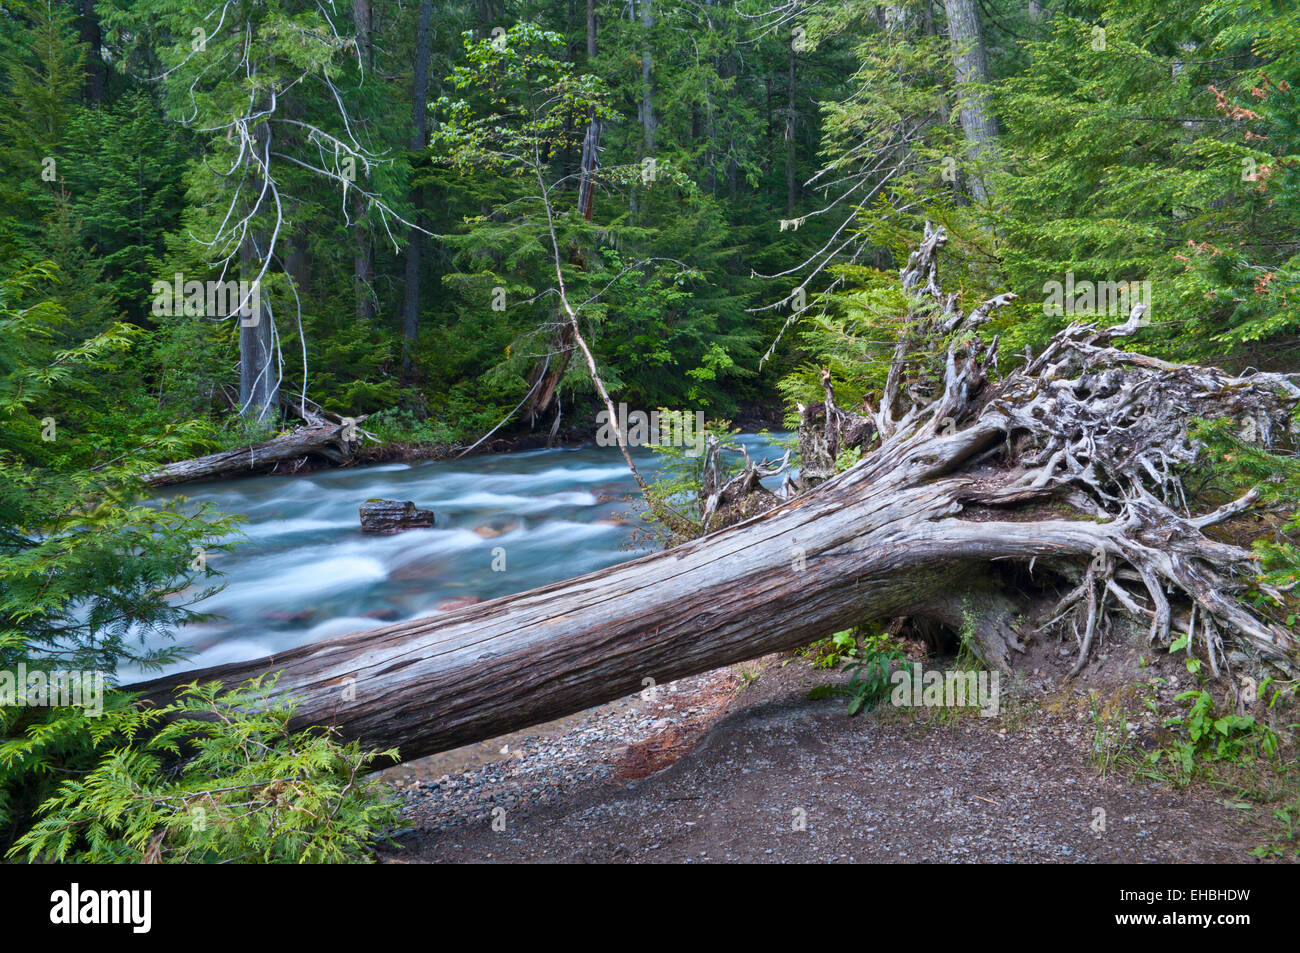 Avalanche Creek with fallen tree in foreground, Glacier National Park, United States. Stock Photo